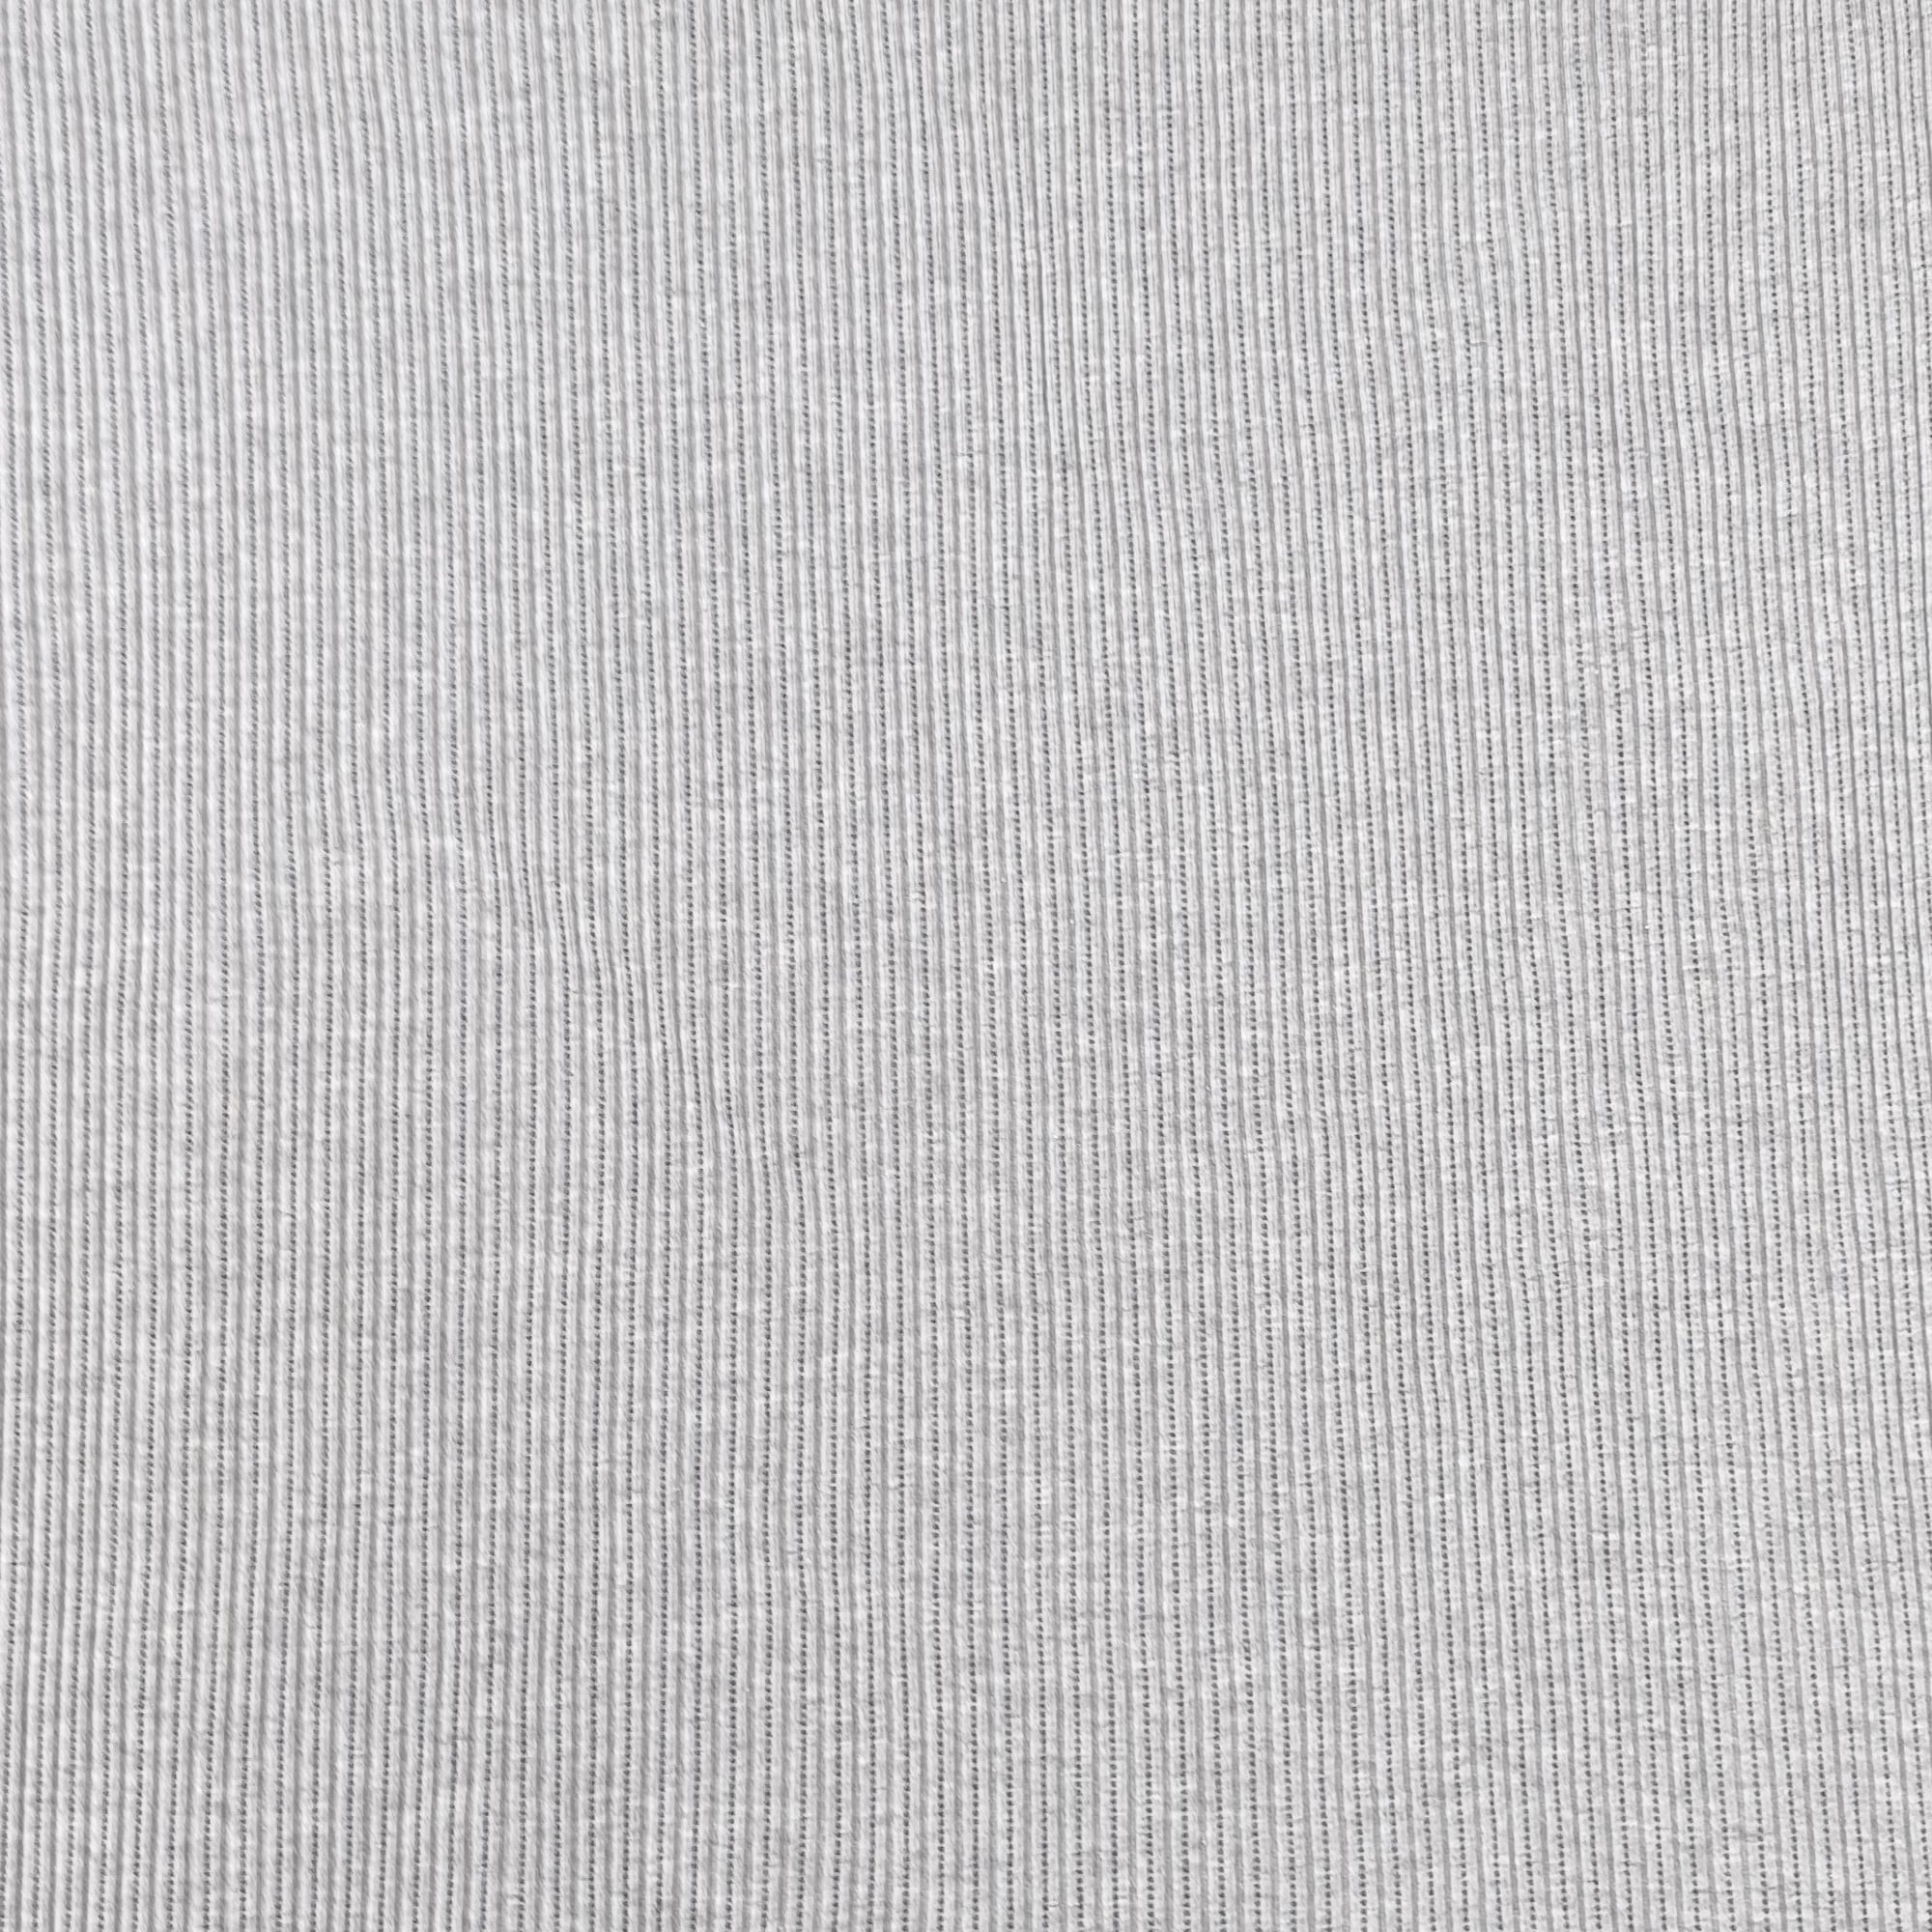 Buy Jersey Fabric Cable Knit - Marl Grey - 140cm Wide Online | More Sewing